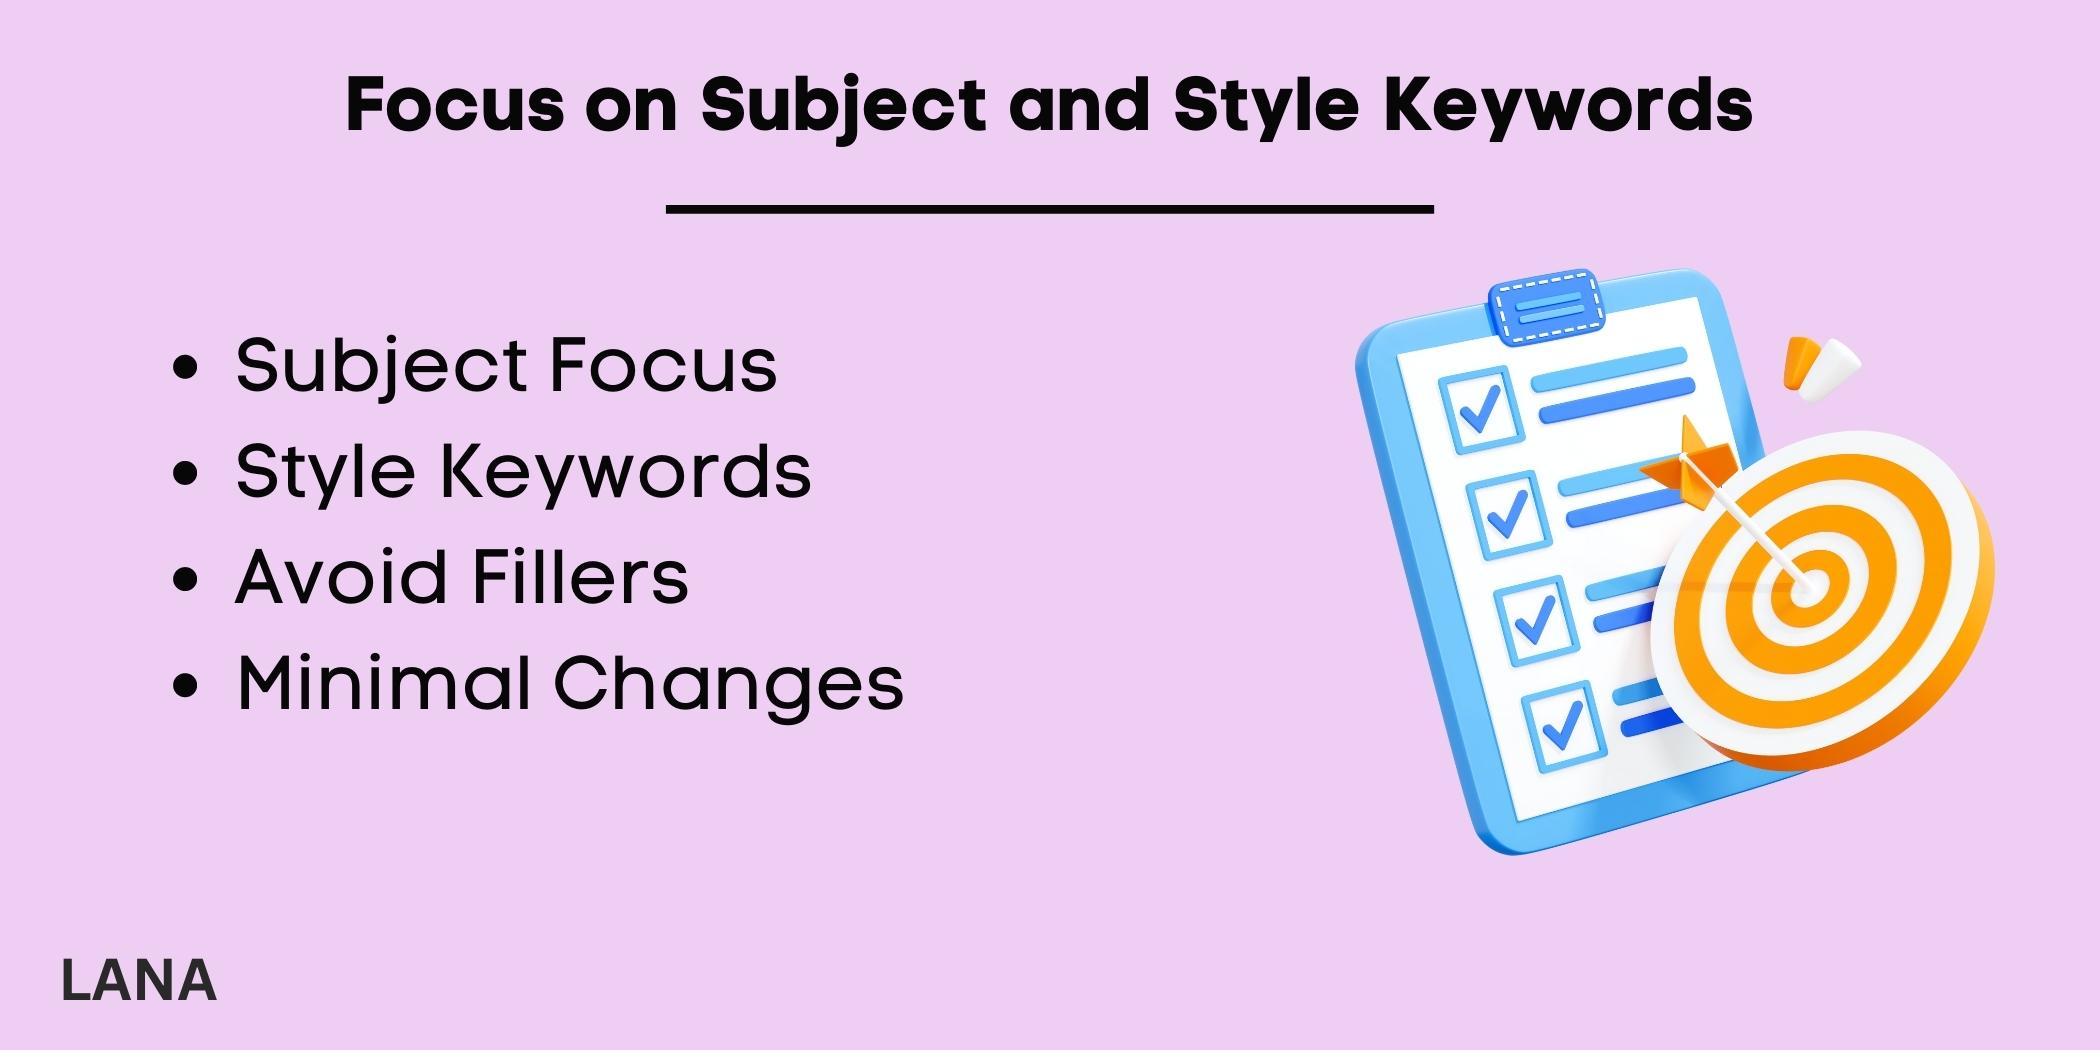 Focus on Subject and Style Keywords